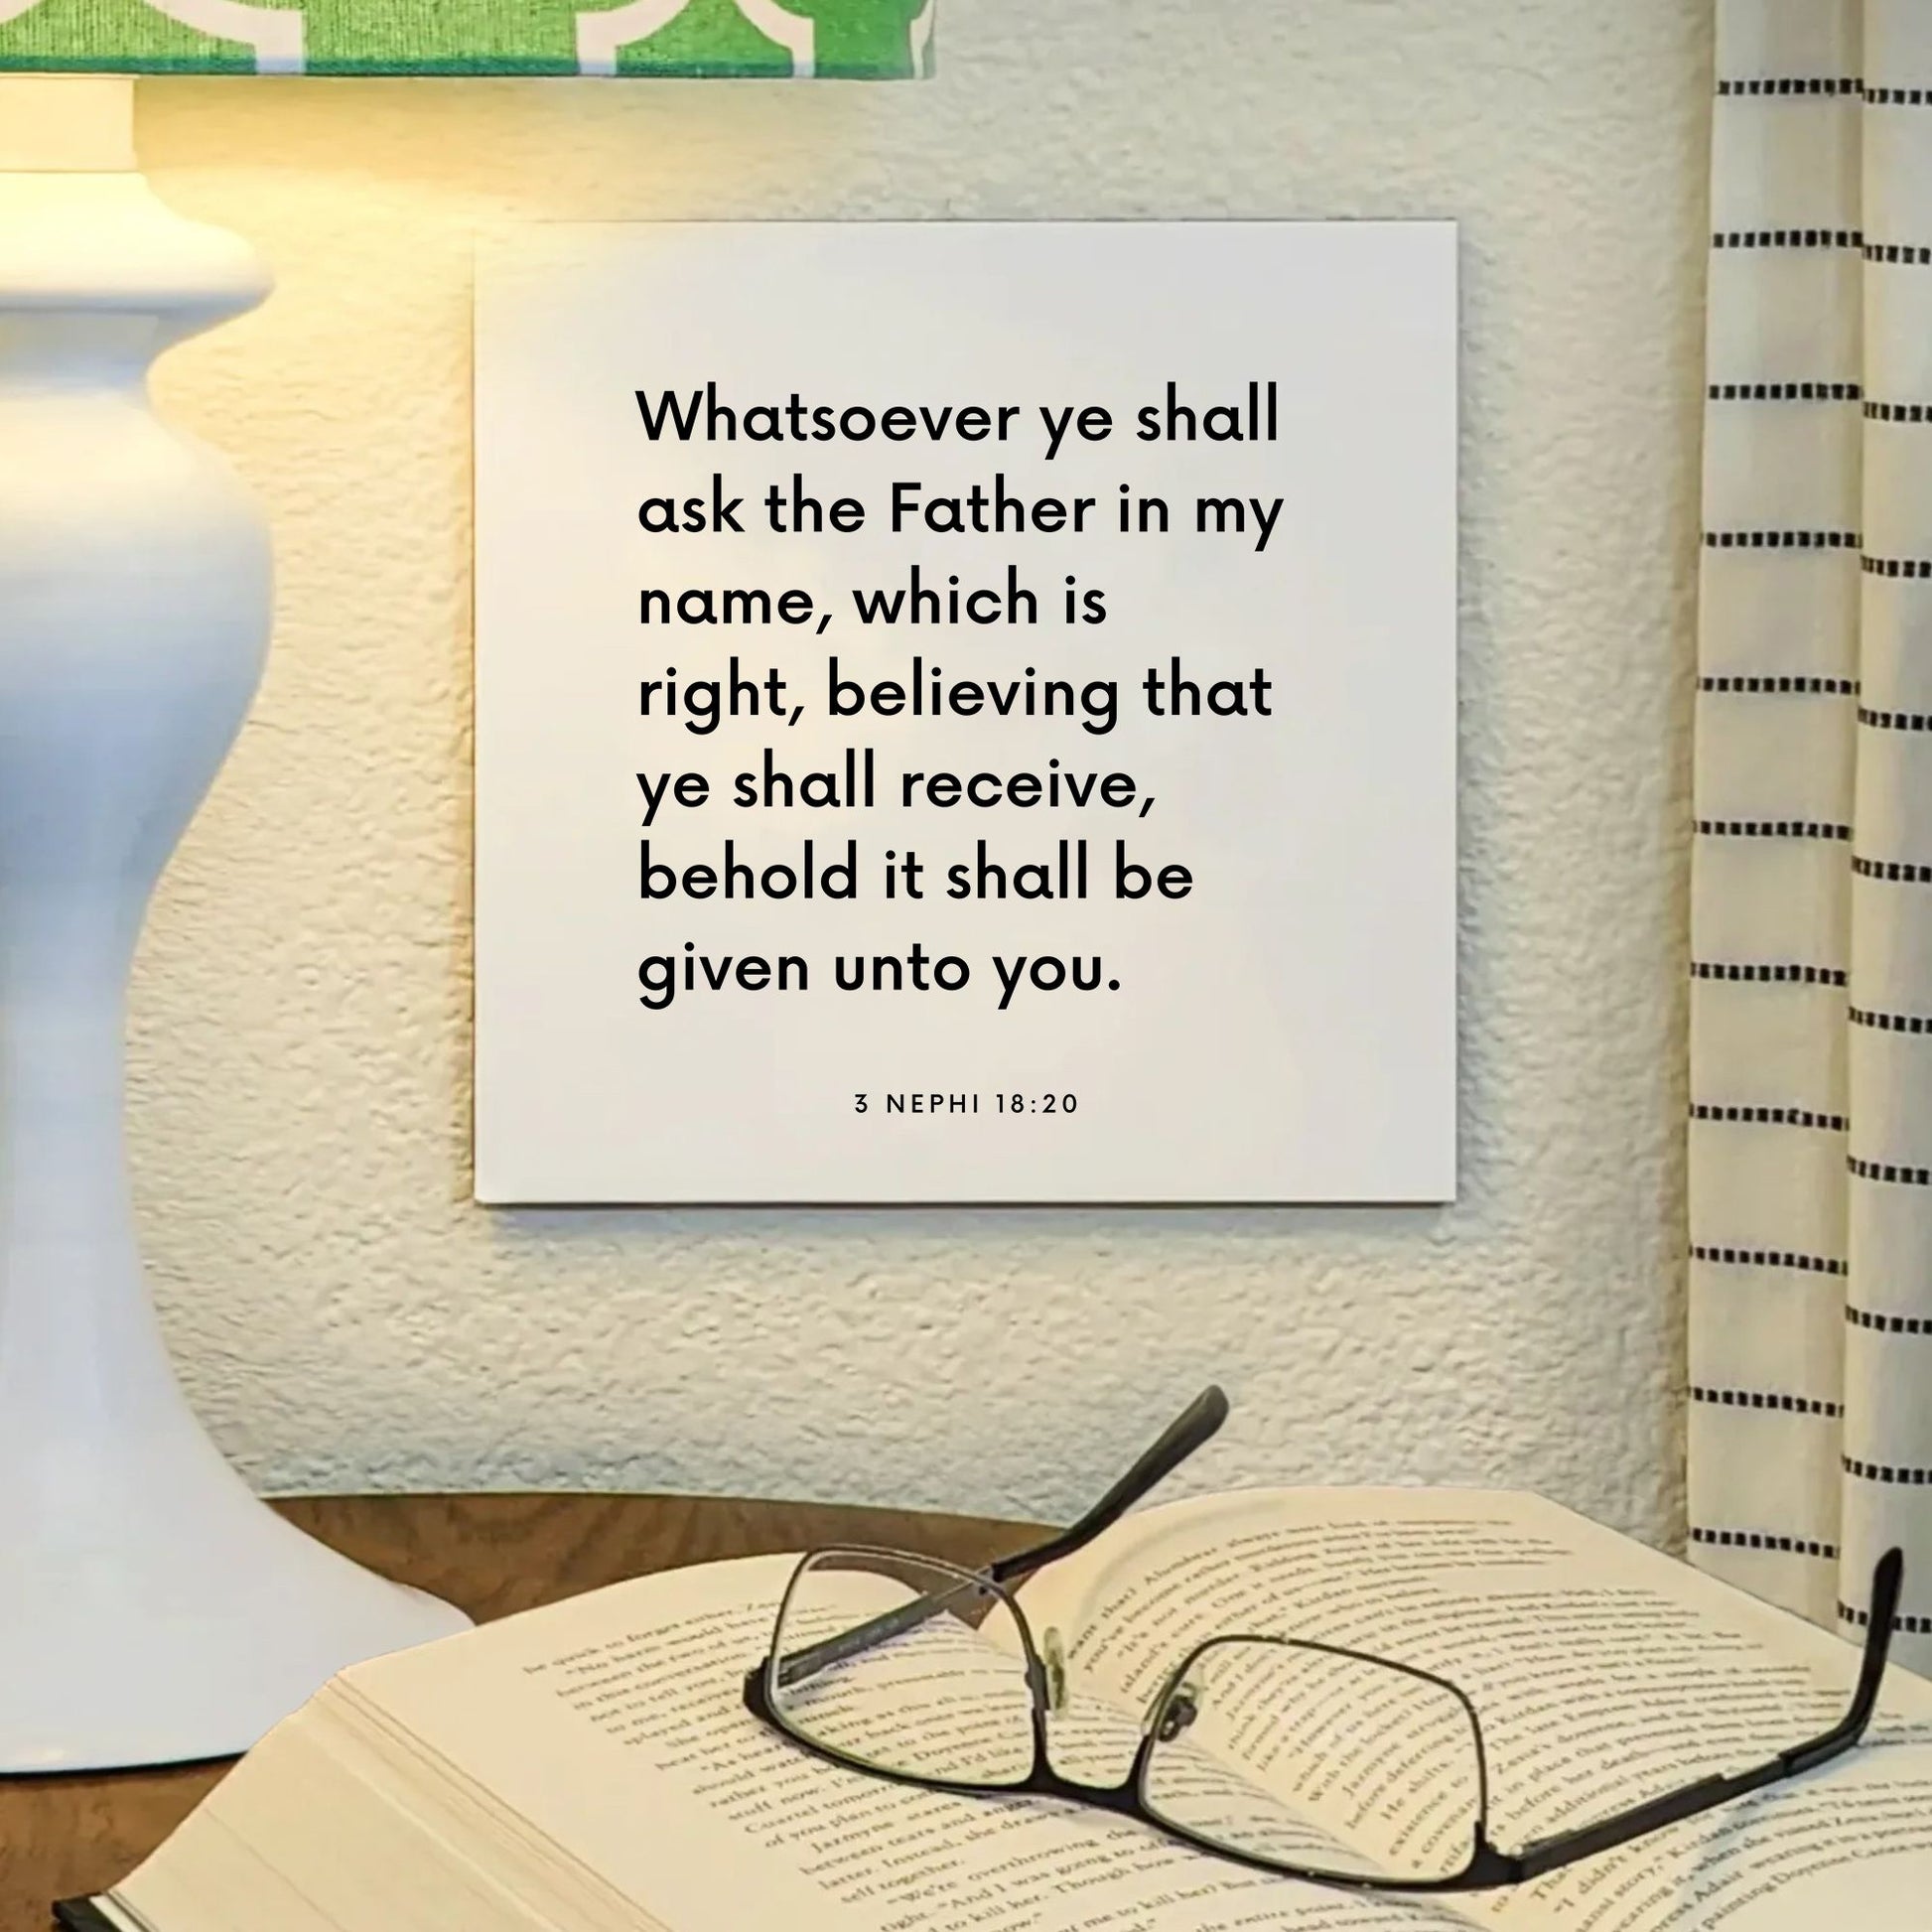 Lamp mouting of the scripture tile for 3 Nephi 18:20 - "Whatsoever ye shall ask the Father in my name"